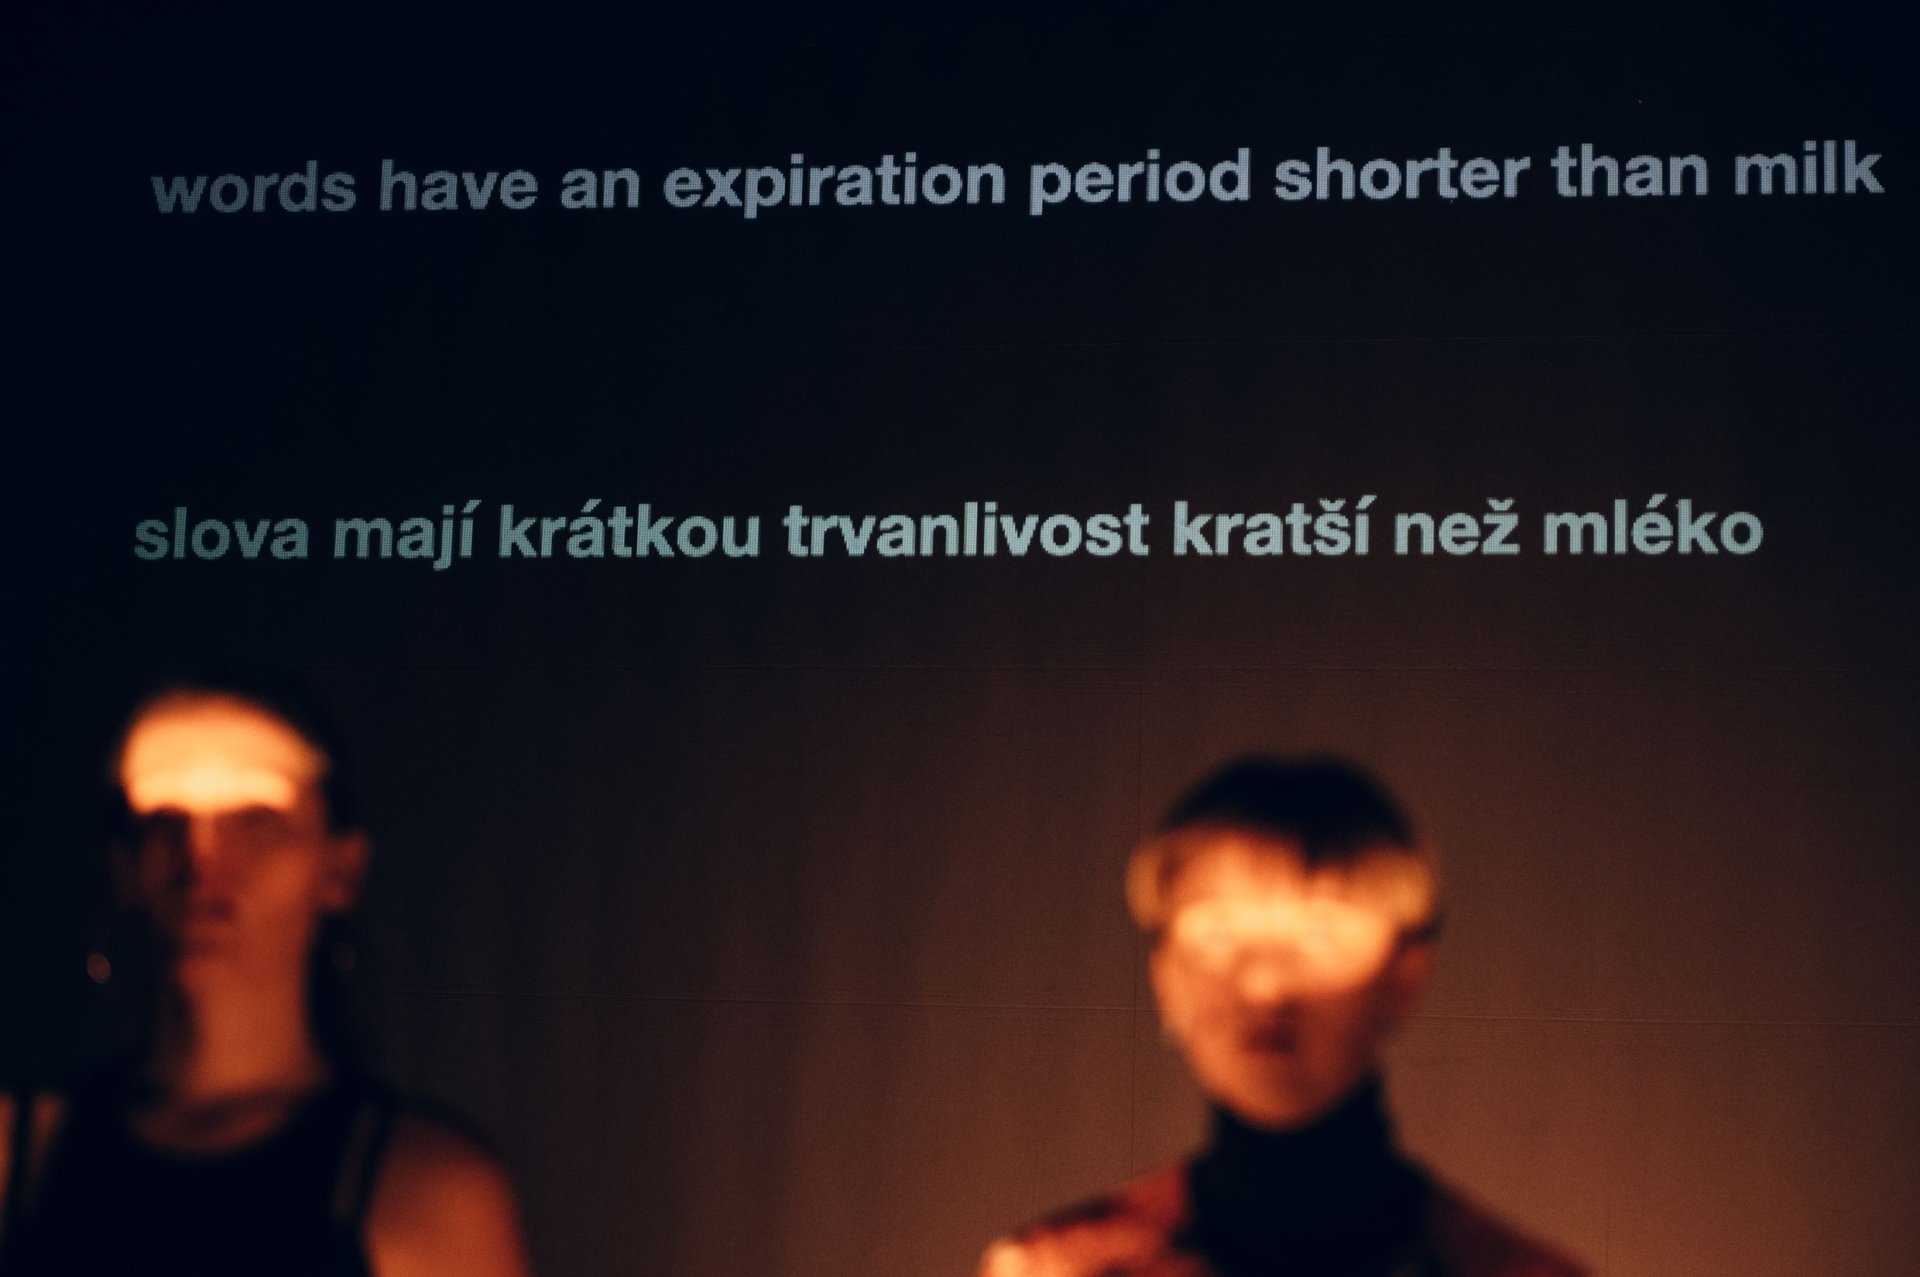 Eight Short Compositions on the Lives of Ukrainians for a Western Audience